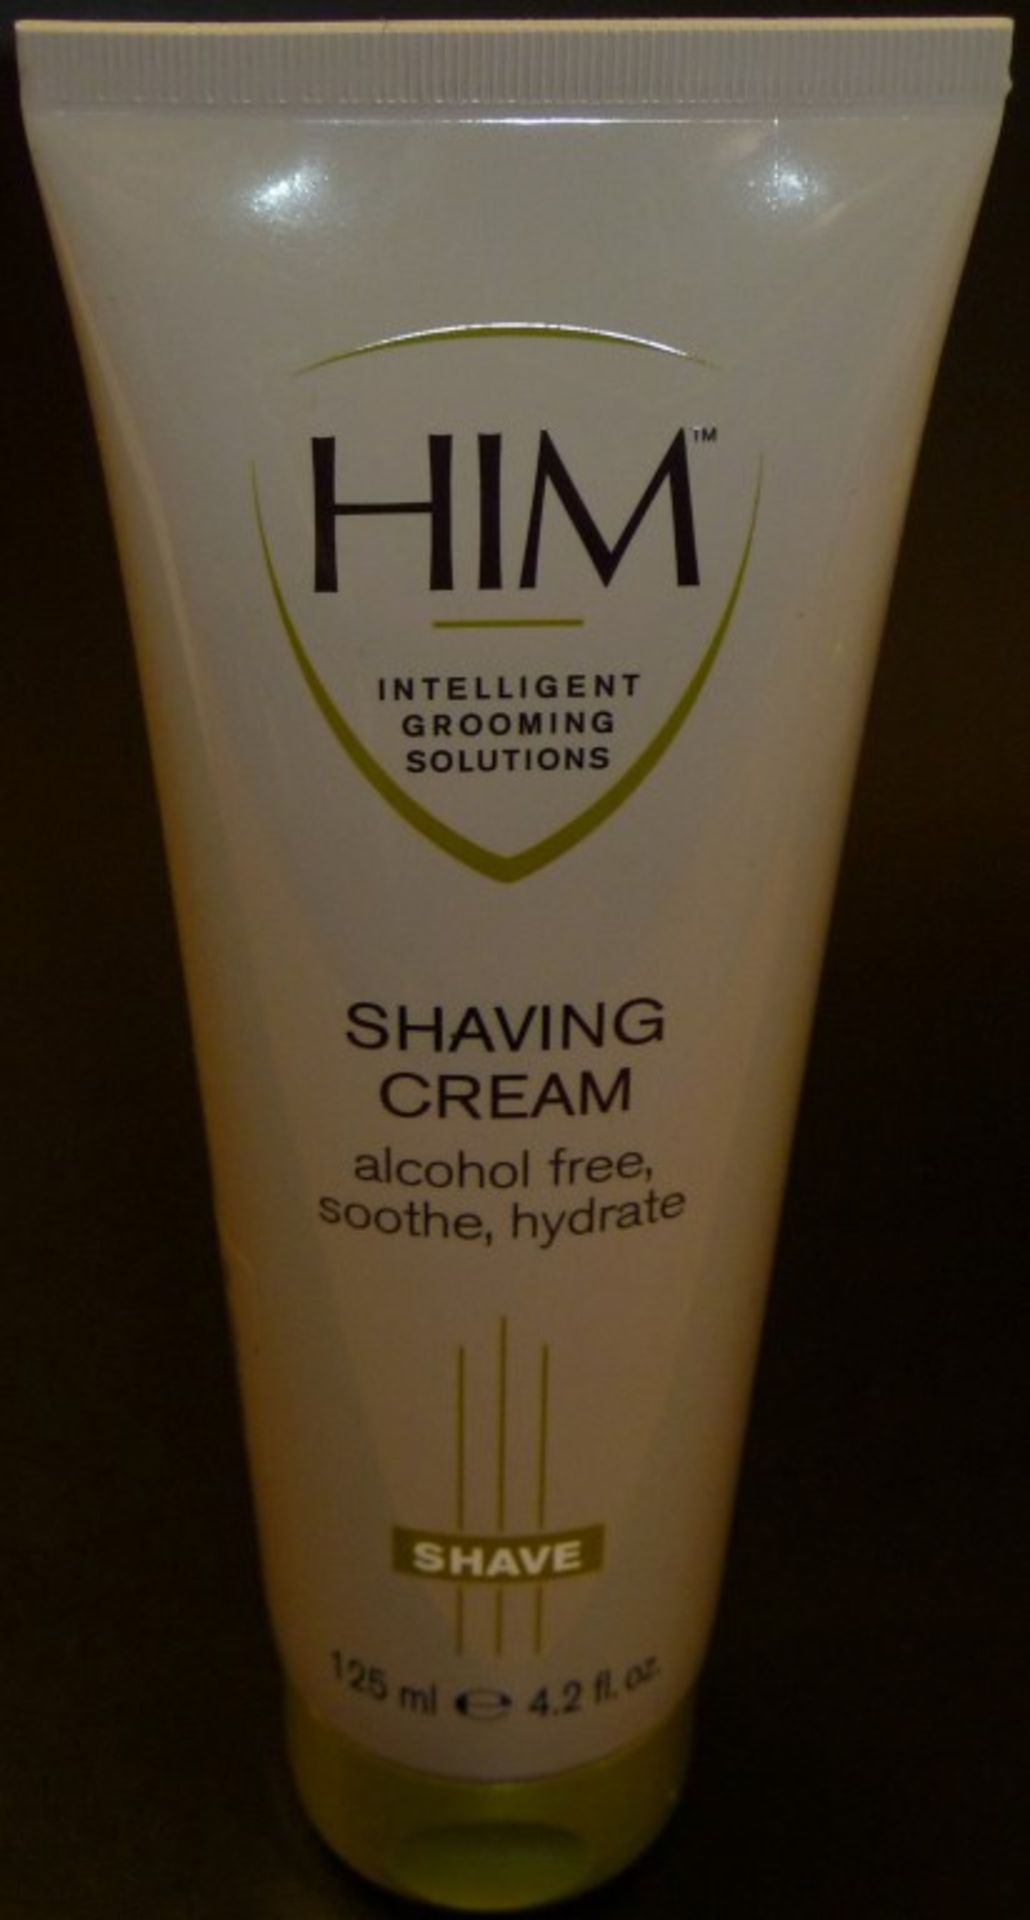 20 x HIM Intelligent Grooming Solutions - 125ml SHAVING CREAM - Brand New Stock - Alcohol Free, - Image 3 of 3